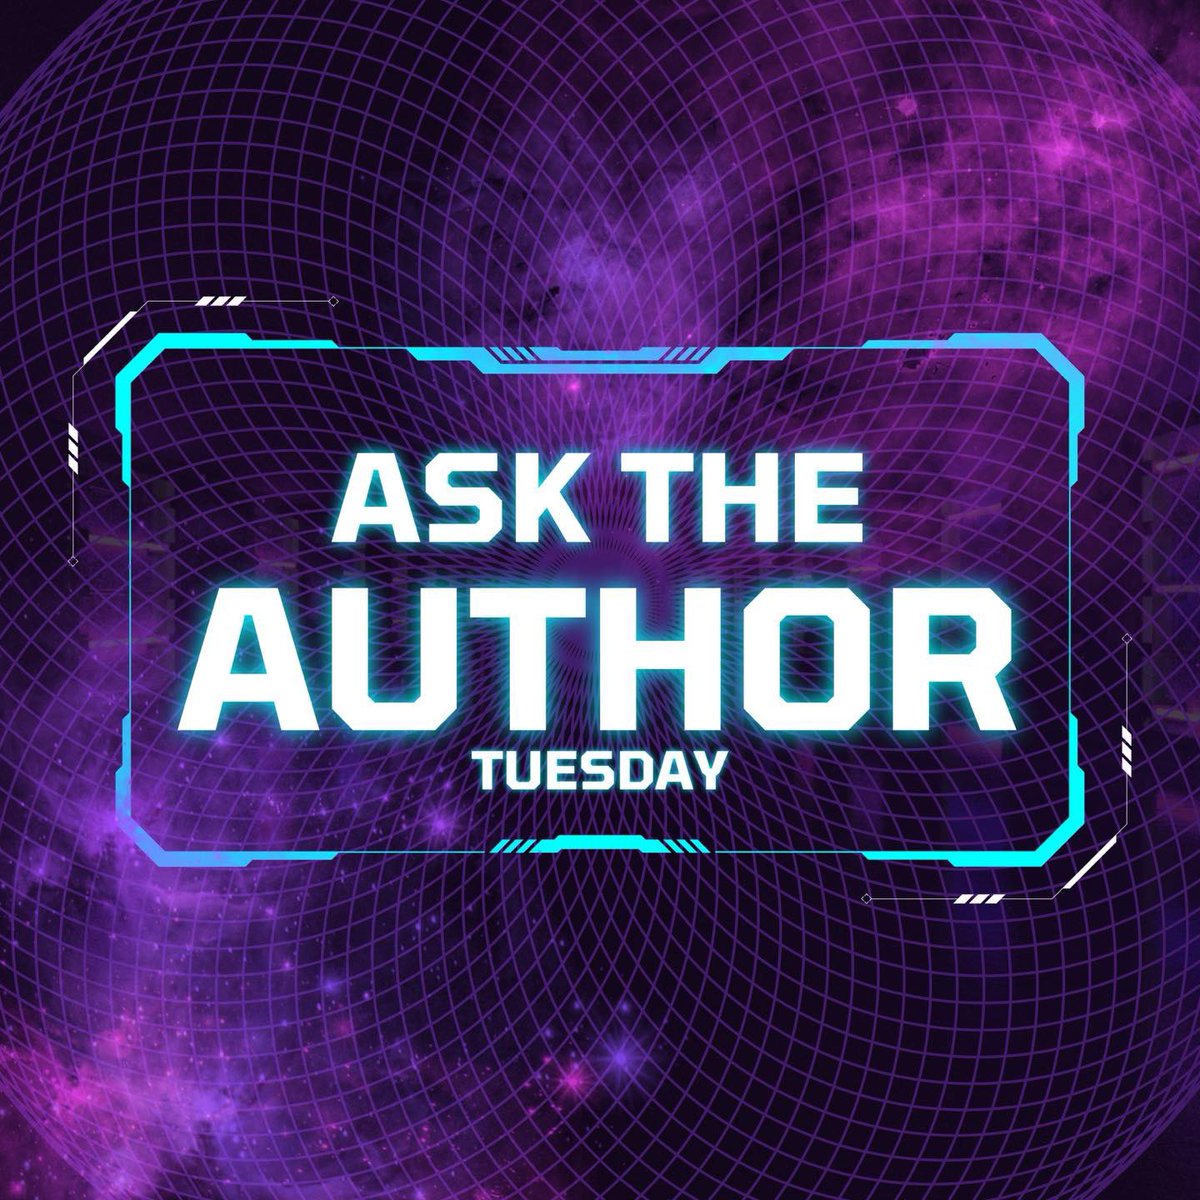 Ask the Author Tuesday!

Ask me anything about my current WIP and I’ll do my best to answer!

#bookish #asktheauthor #indieauthor #momswhowrite #fyp #wip